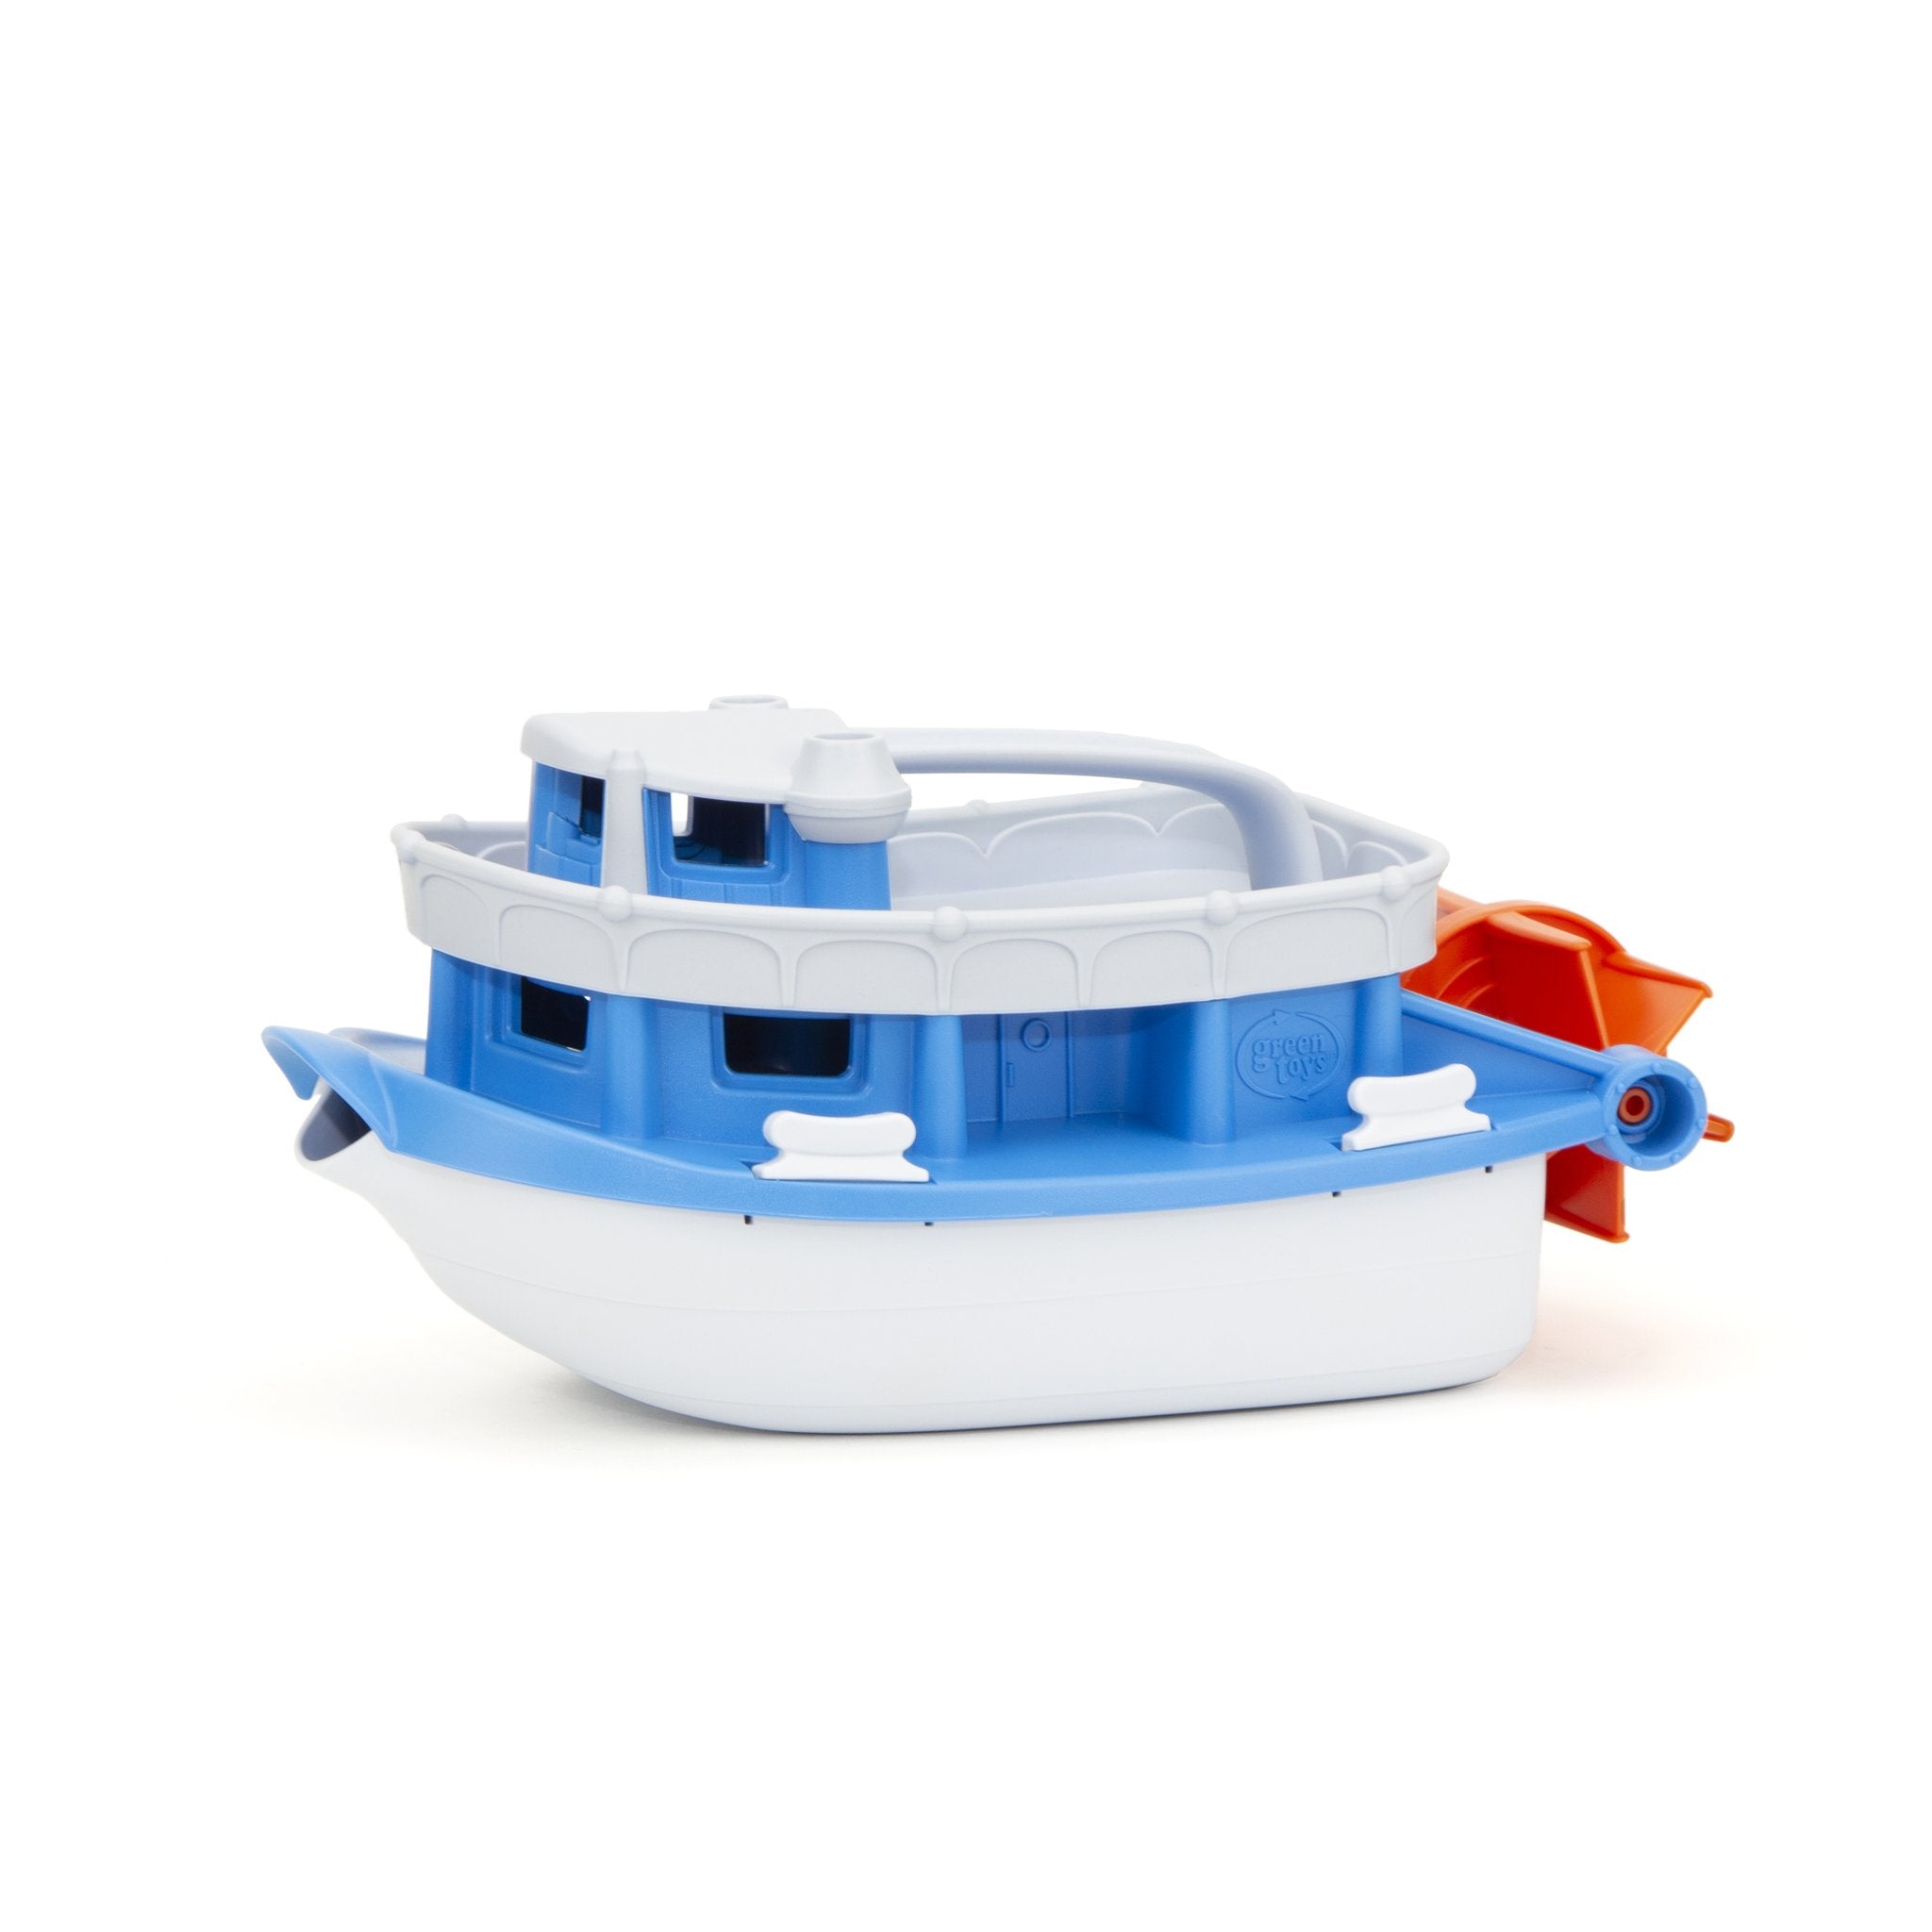 Paddle Boat | Green Toys